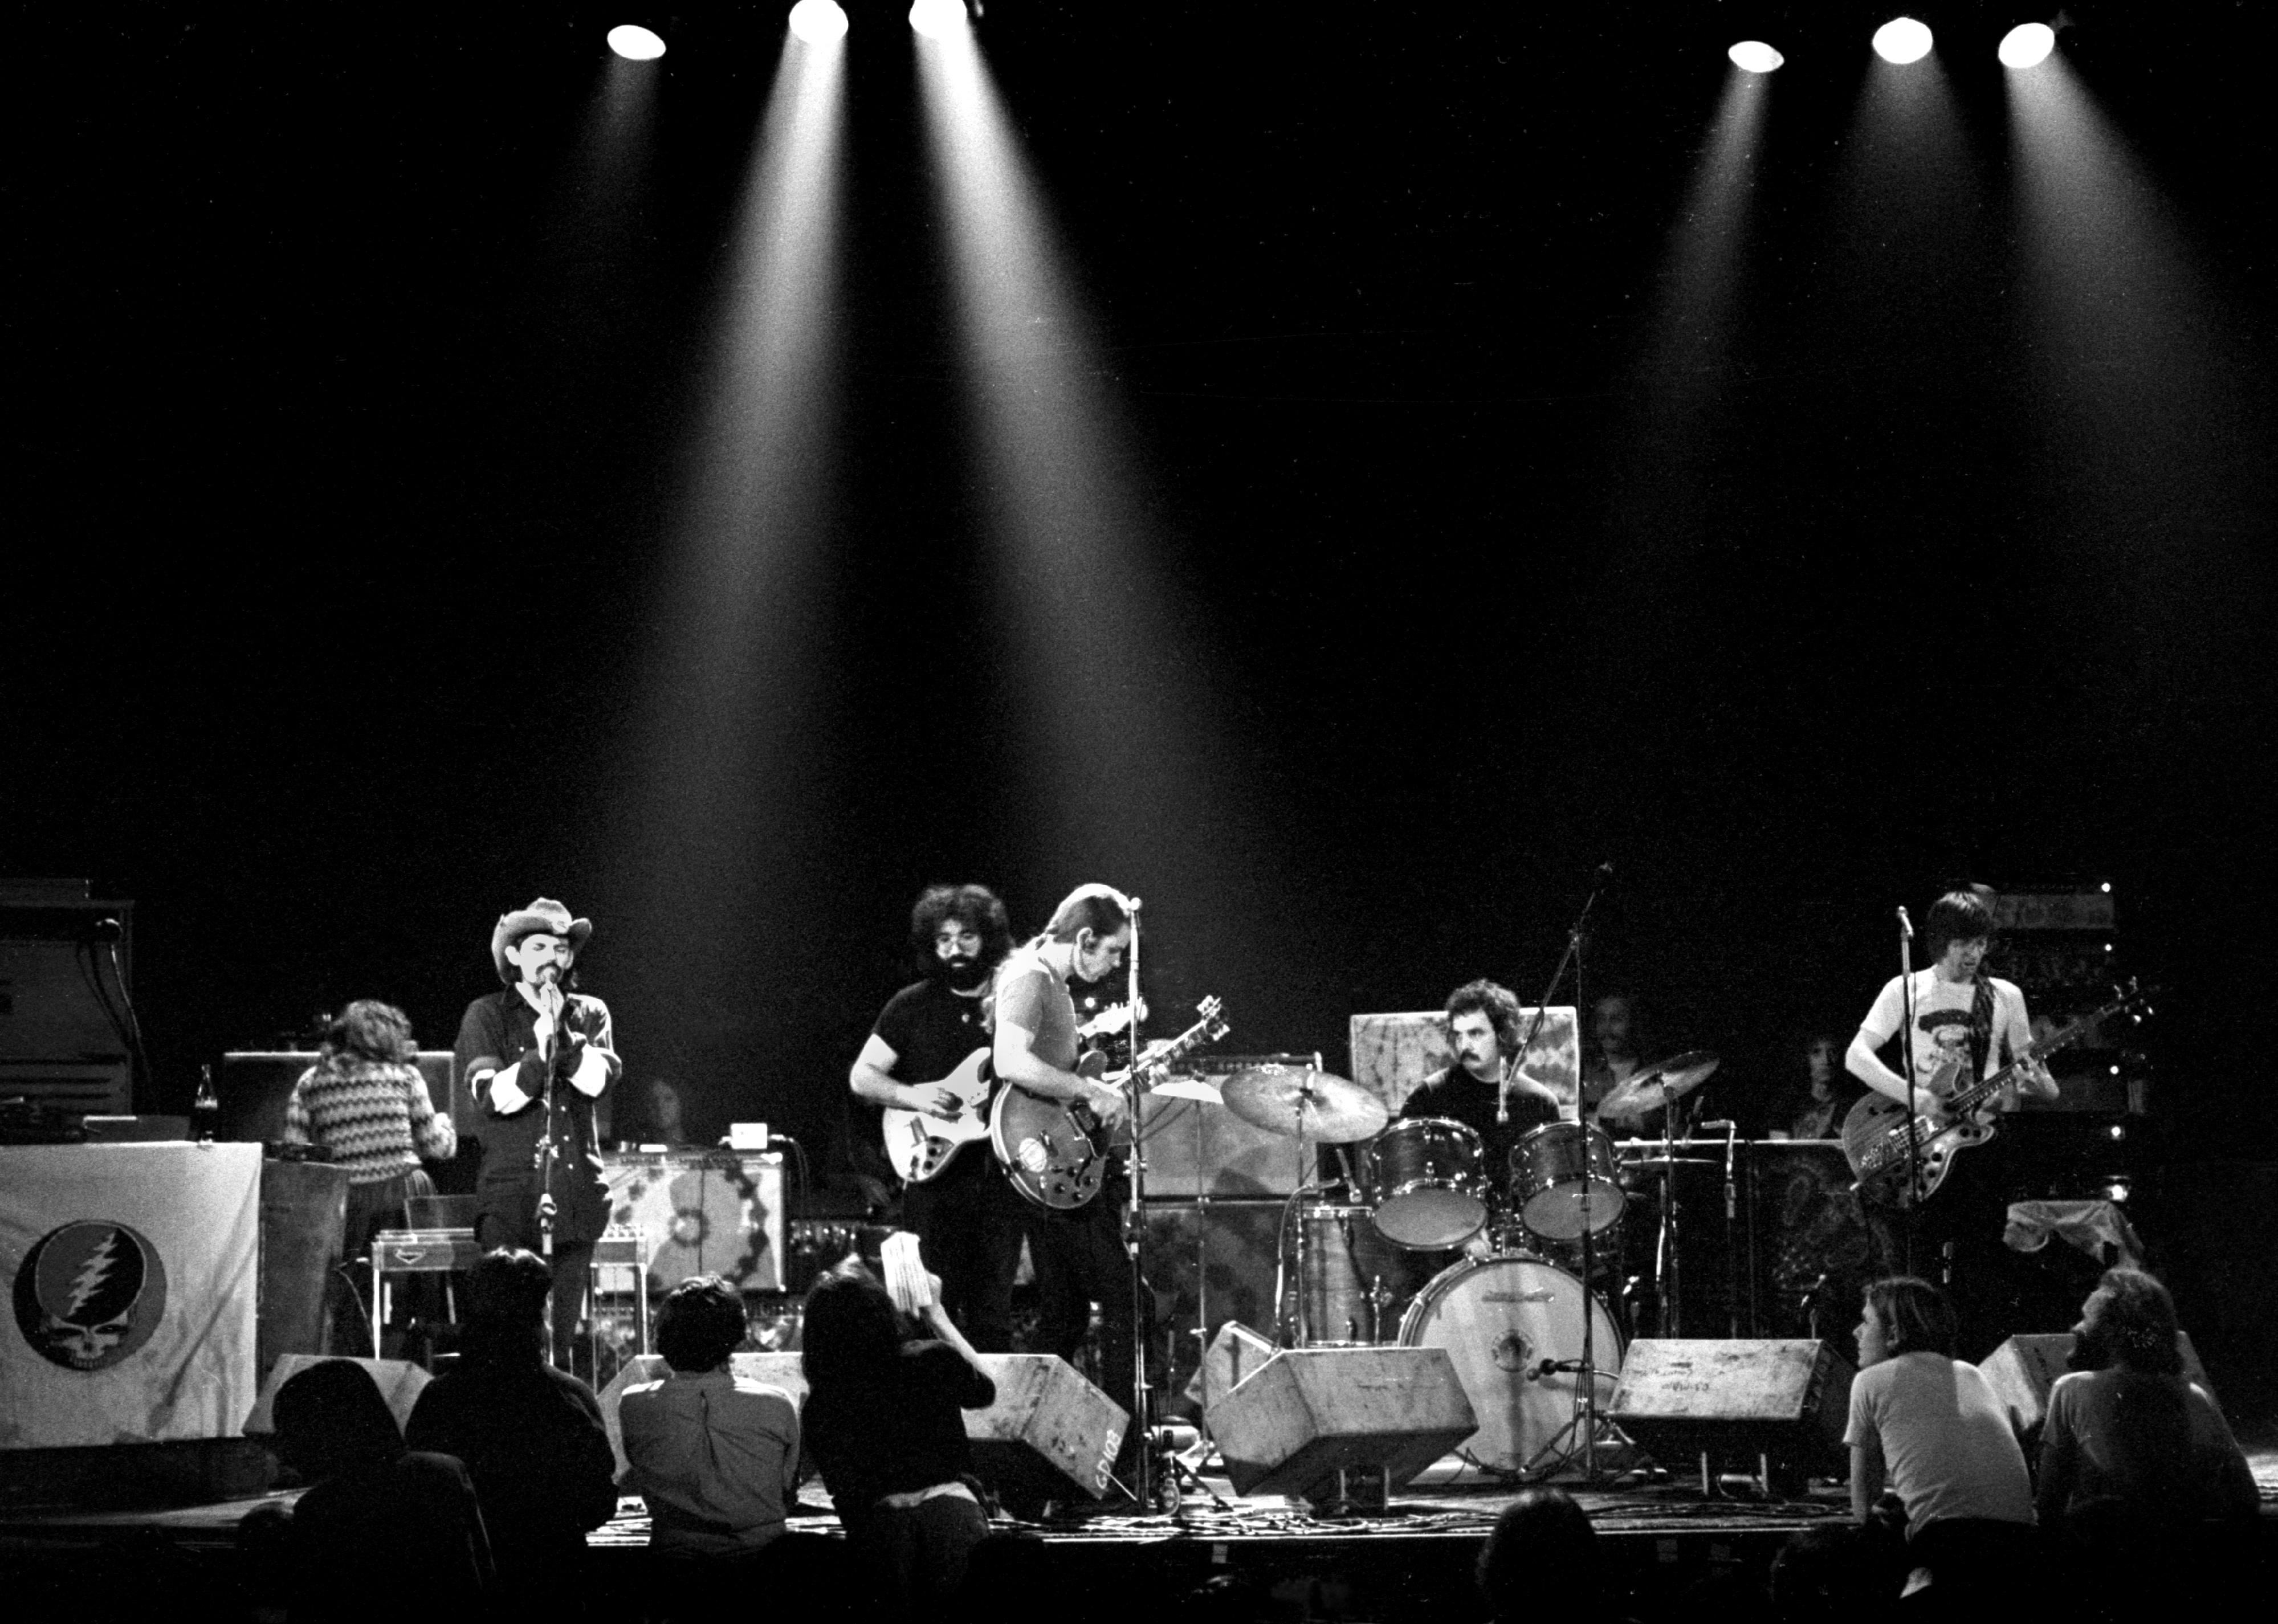 <p>The Grateful Dead's extended tour of Europe touched down in major cities and found the band jamming for hours at a time. Select recordings were captured for a historic triple album, which <a href="https://www.billboard.com/music/rock/grateful-dead-europe-72-live-album-1235166475/">helped them pay off a debt to their label</a>. Group member Pigpen died the following year.</p>